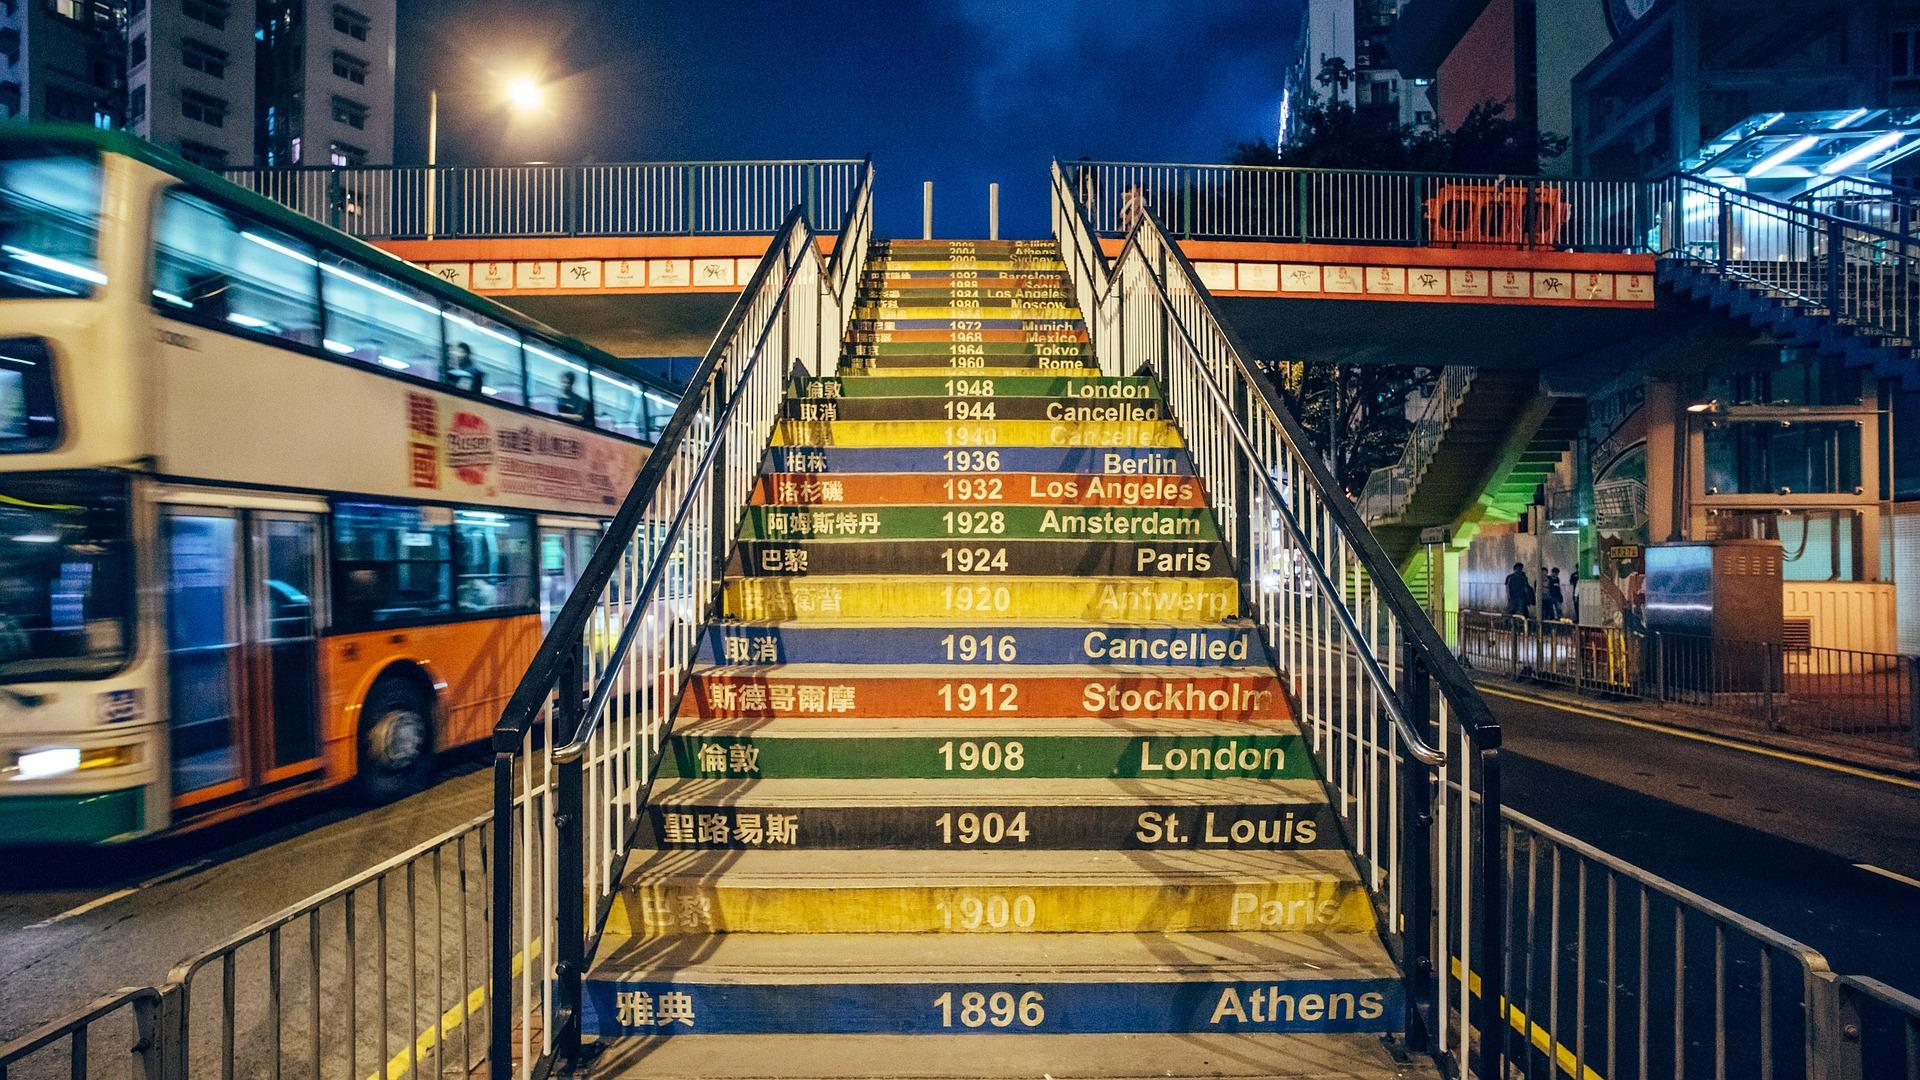 Mural of Olympic Game years painted on bridge steps in a city